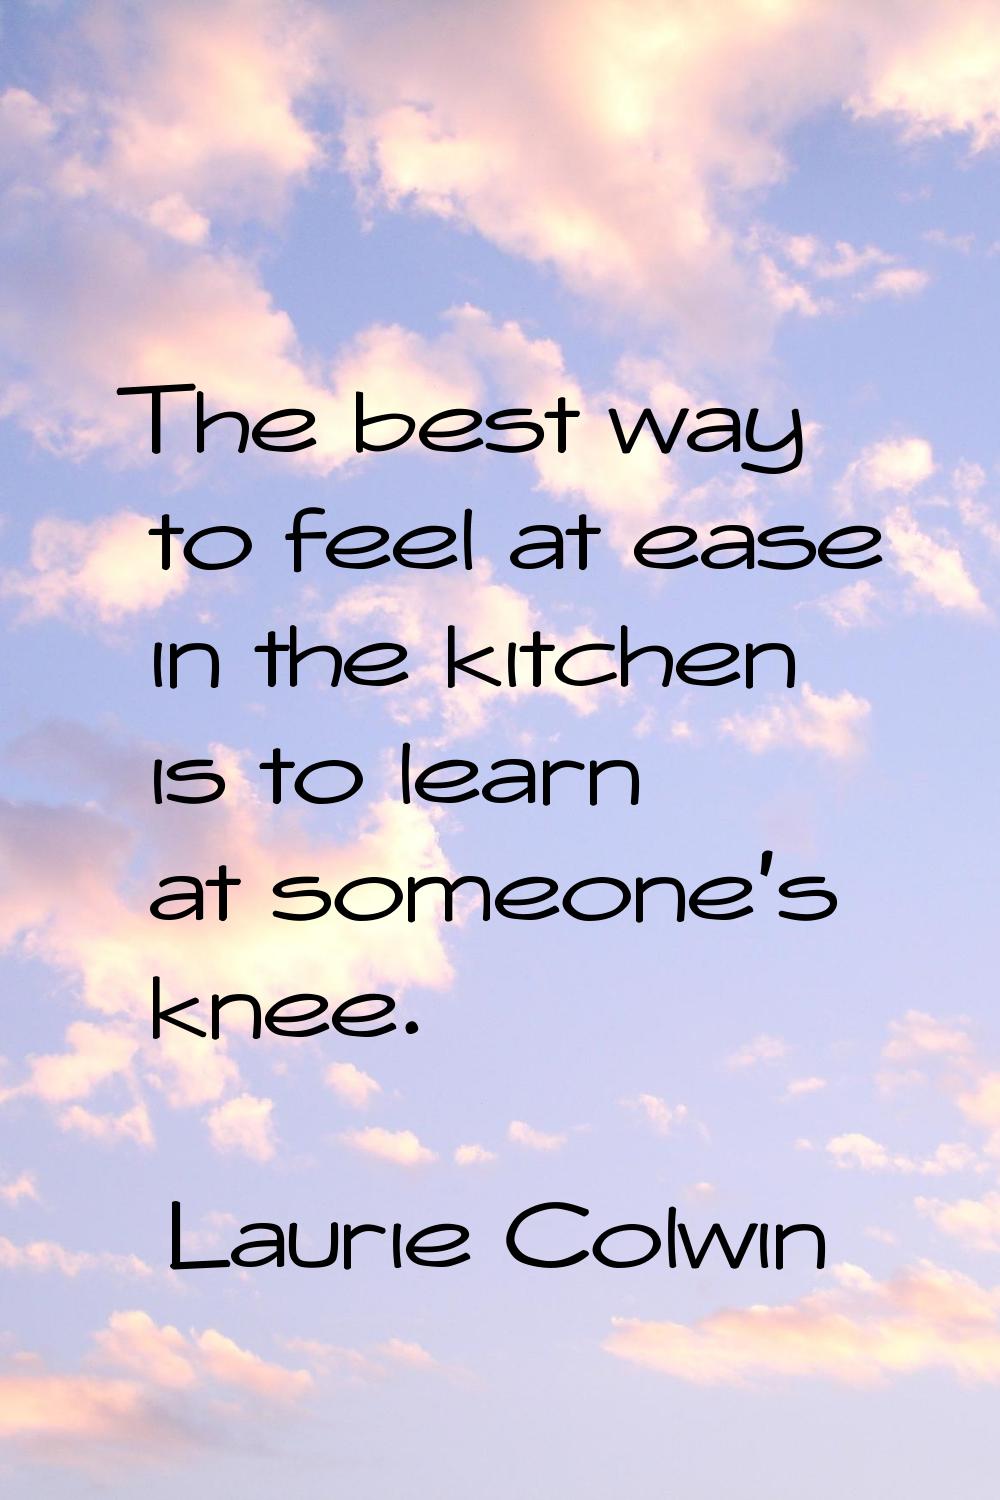 The best way to feel at ease in the kitchen is to learn at someone's knee.